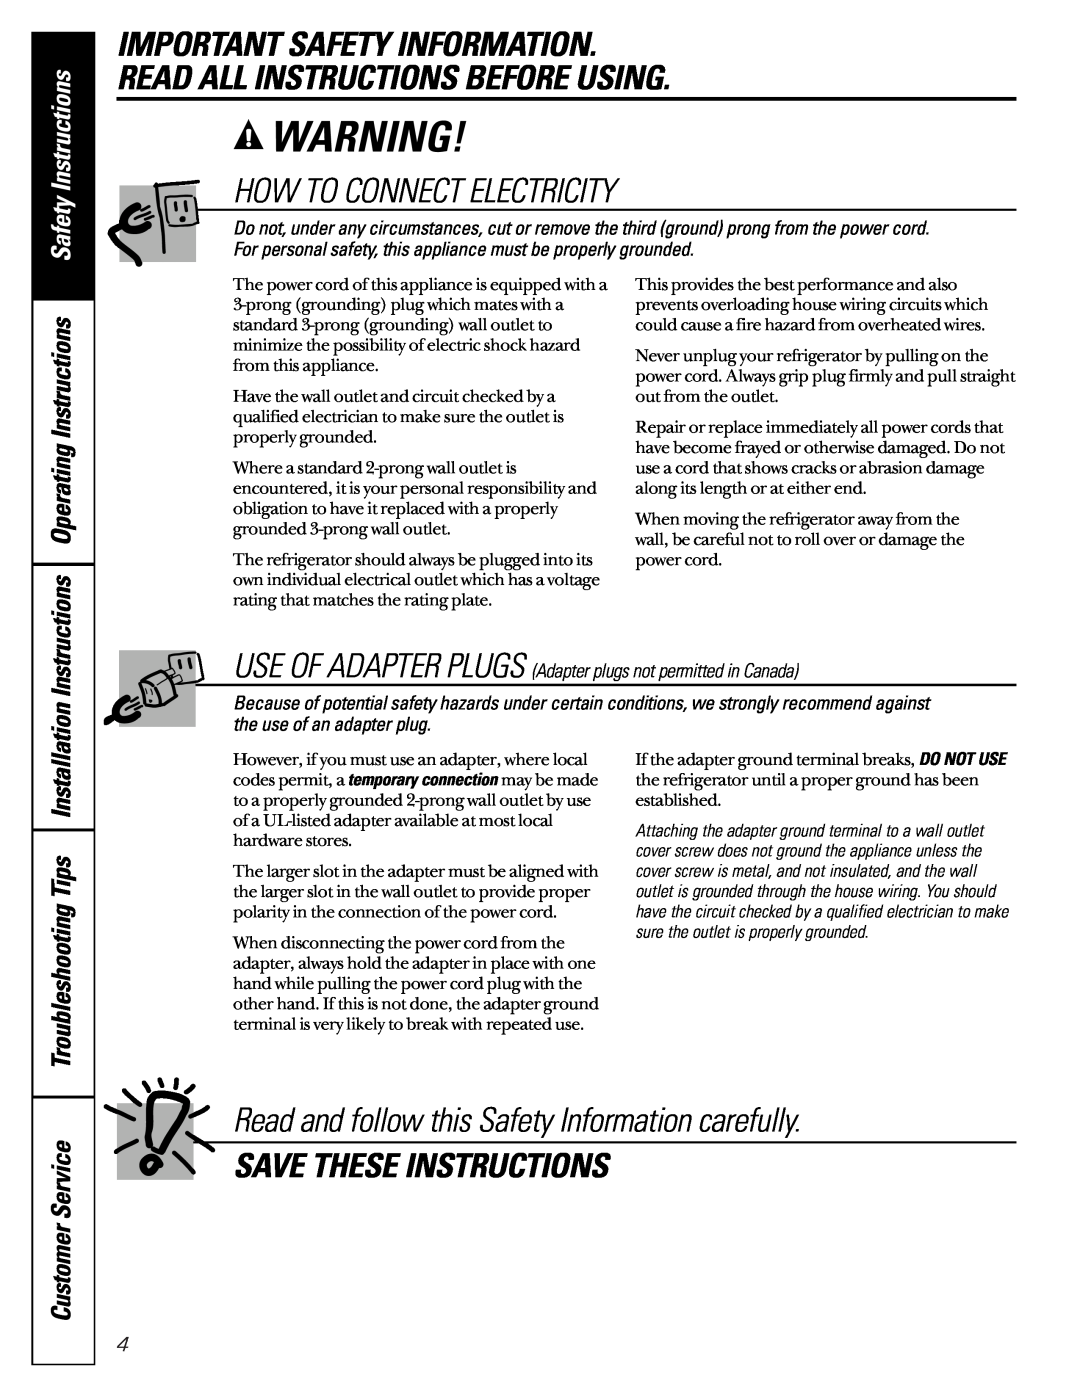 GE TCX22 How To Connect Electricity, Save These Instructions, Read and follow this Safety Information carefully 